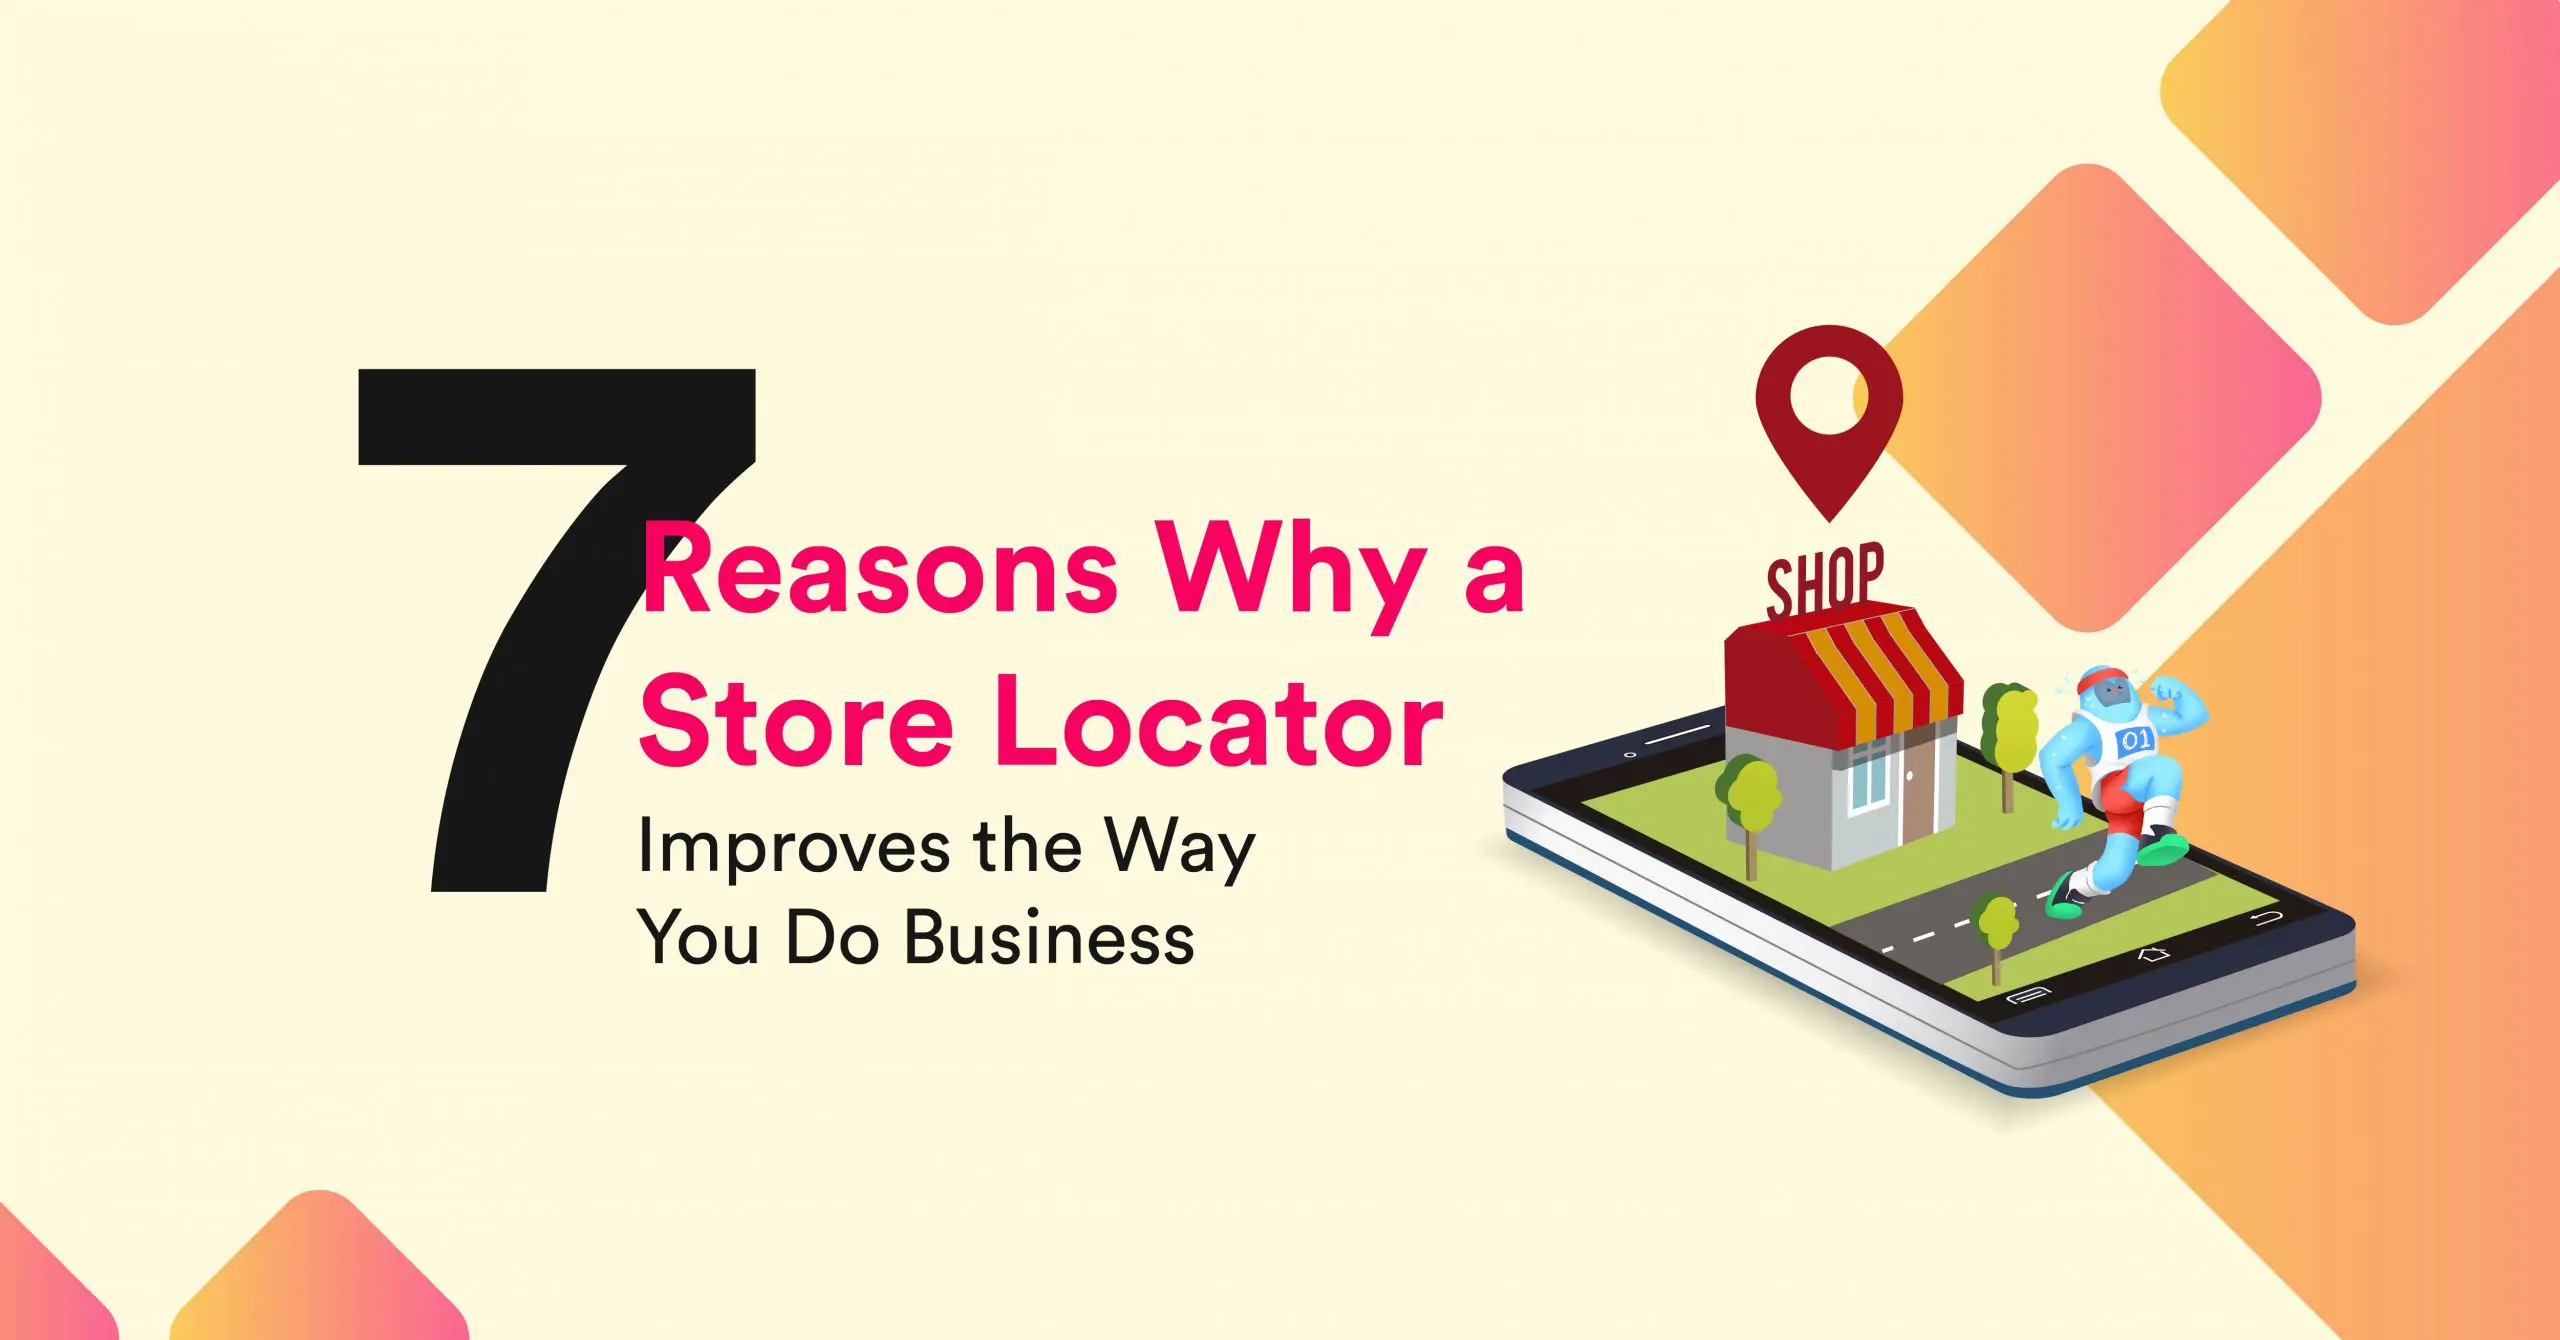 7 Reasons Why a Store Locator Improves the Way You Do Business